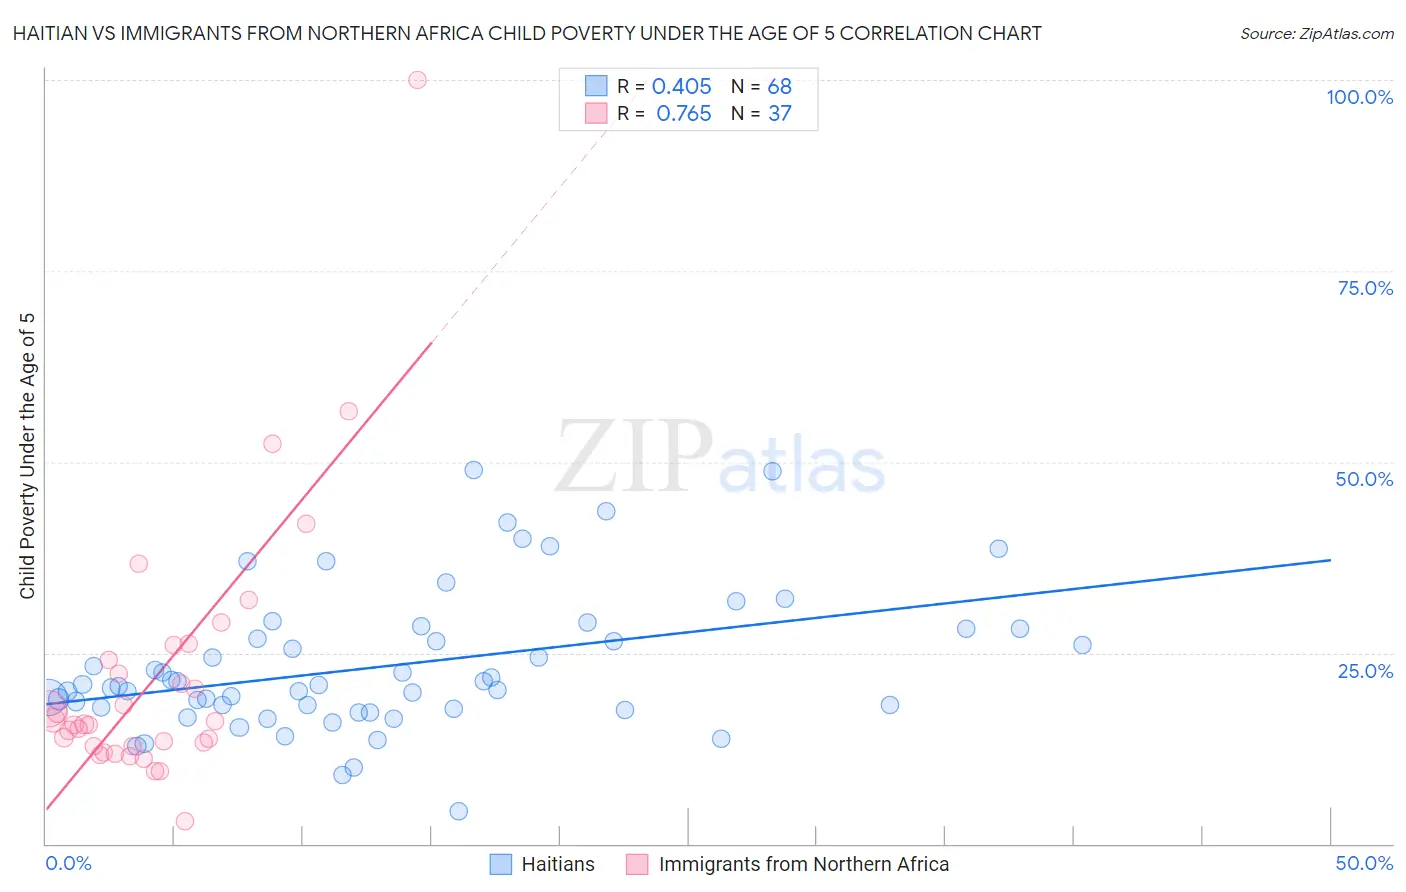 Haitian vs Immigrants from Northern Africa Child Poverty Under the Age of 5